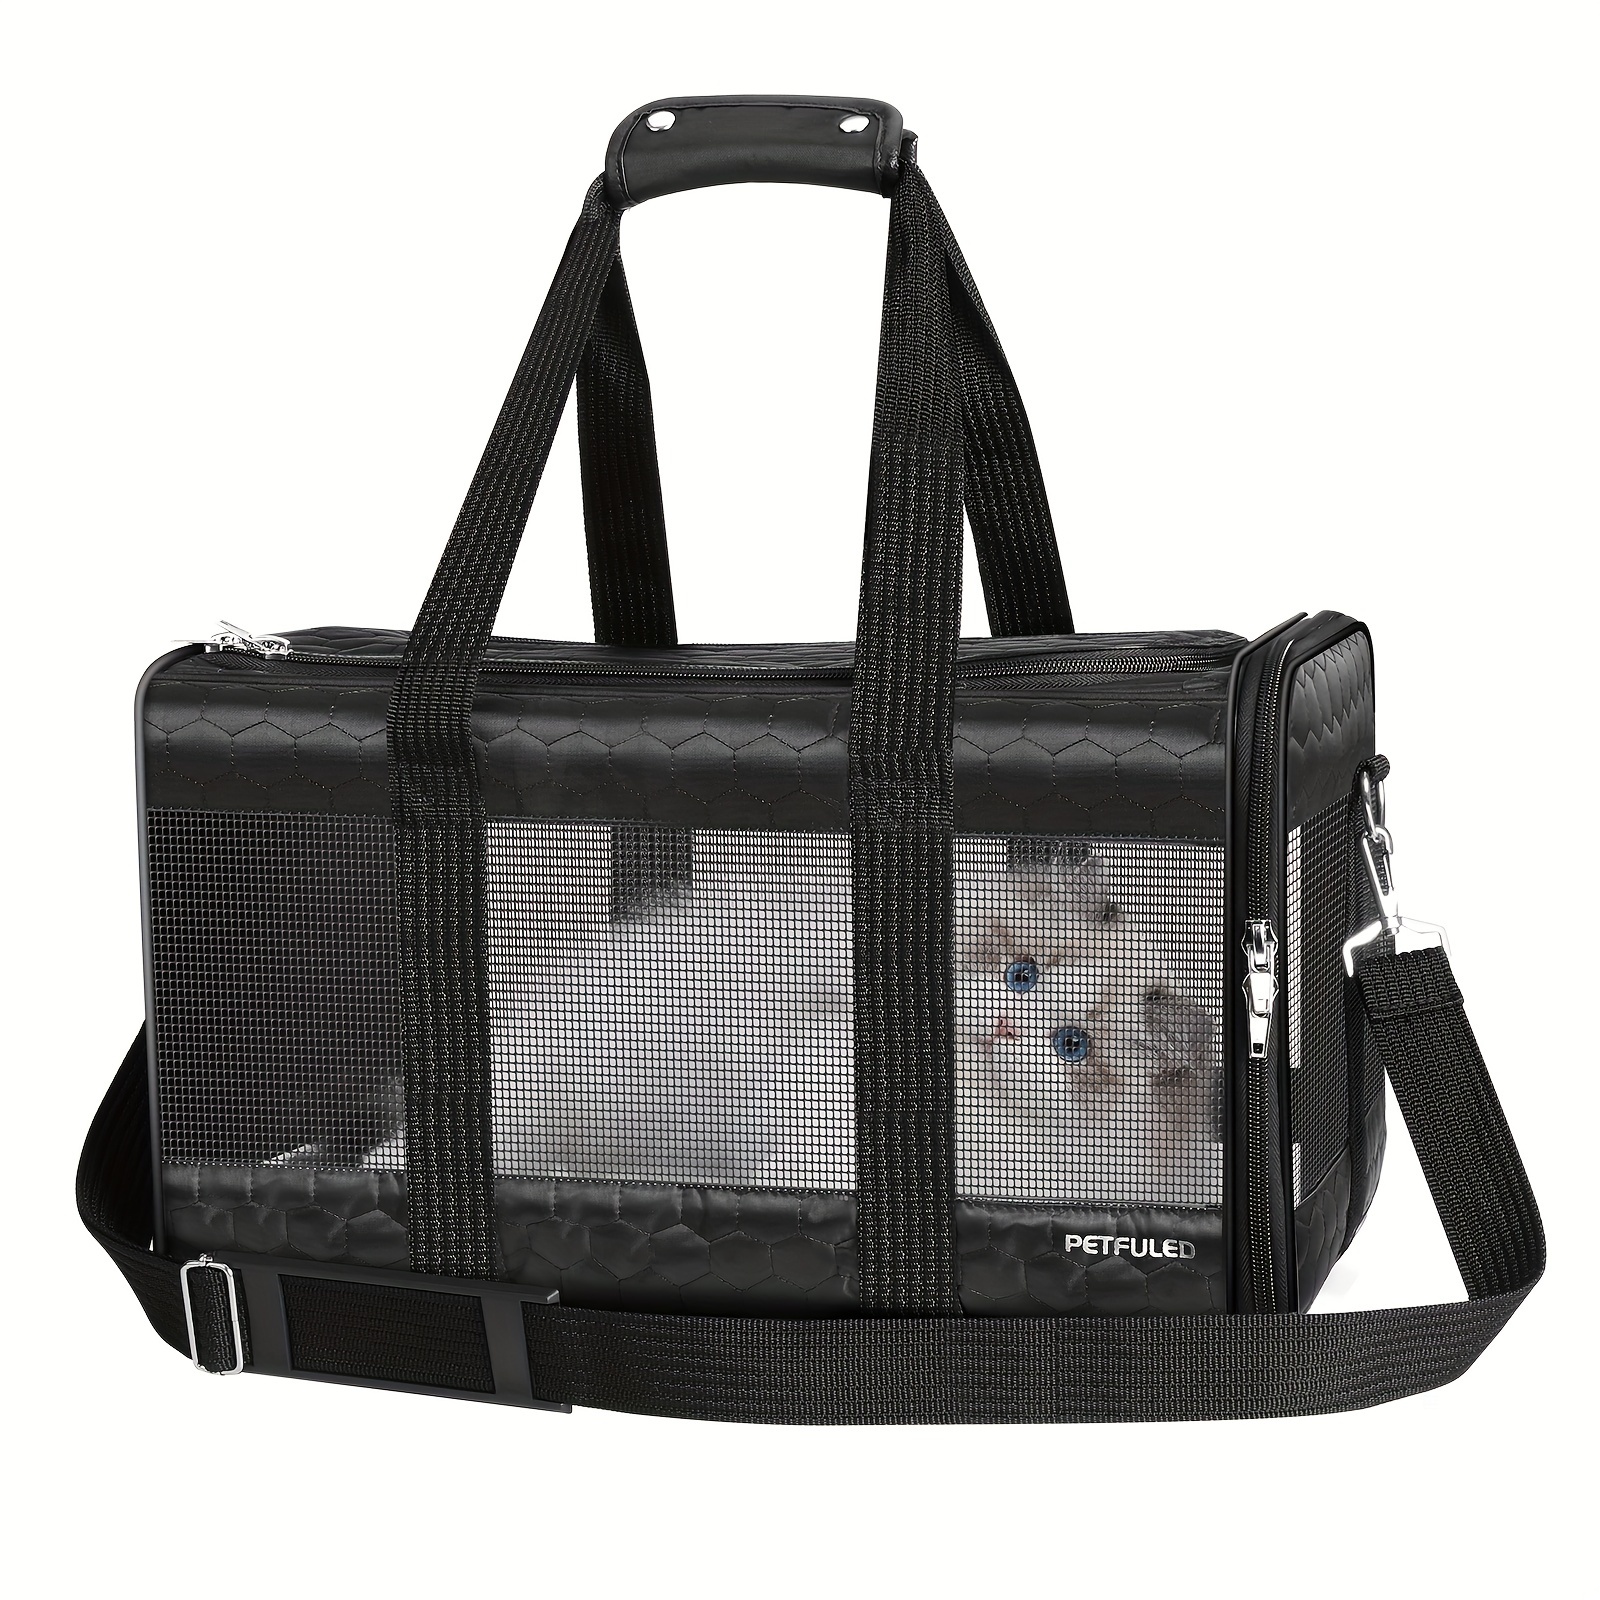 ScratchMe Pet Travel Carrier Soft Sided Portable Bag for Cats, Small Dogs, or